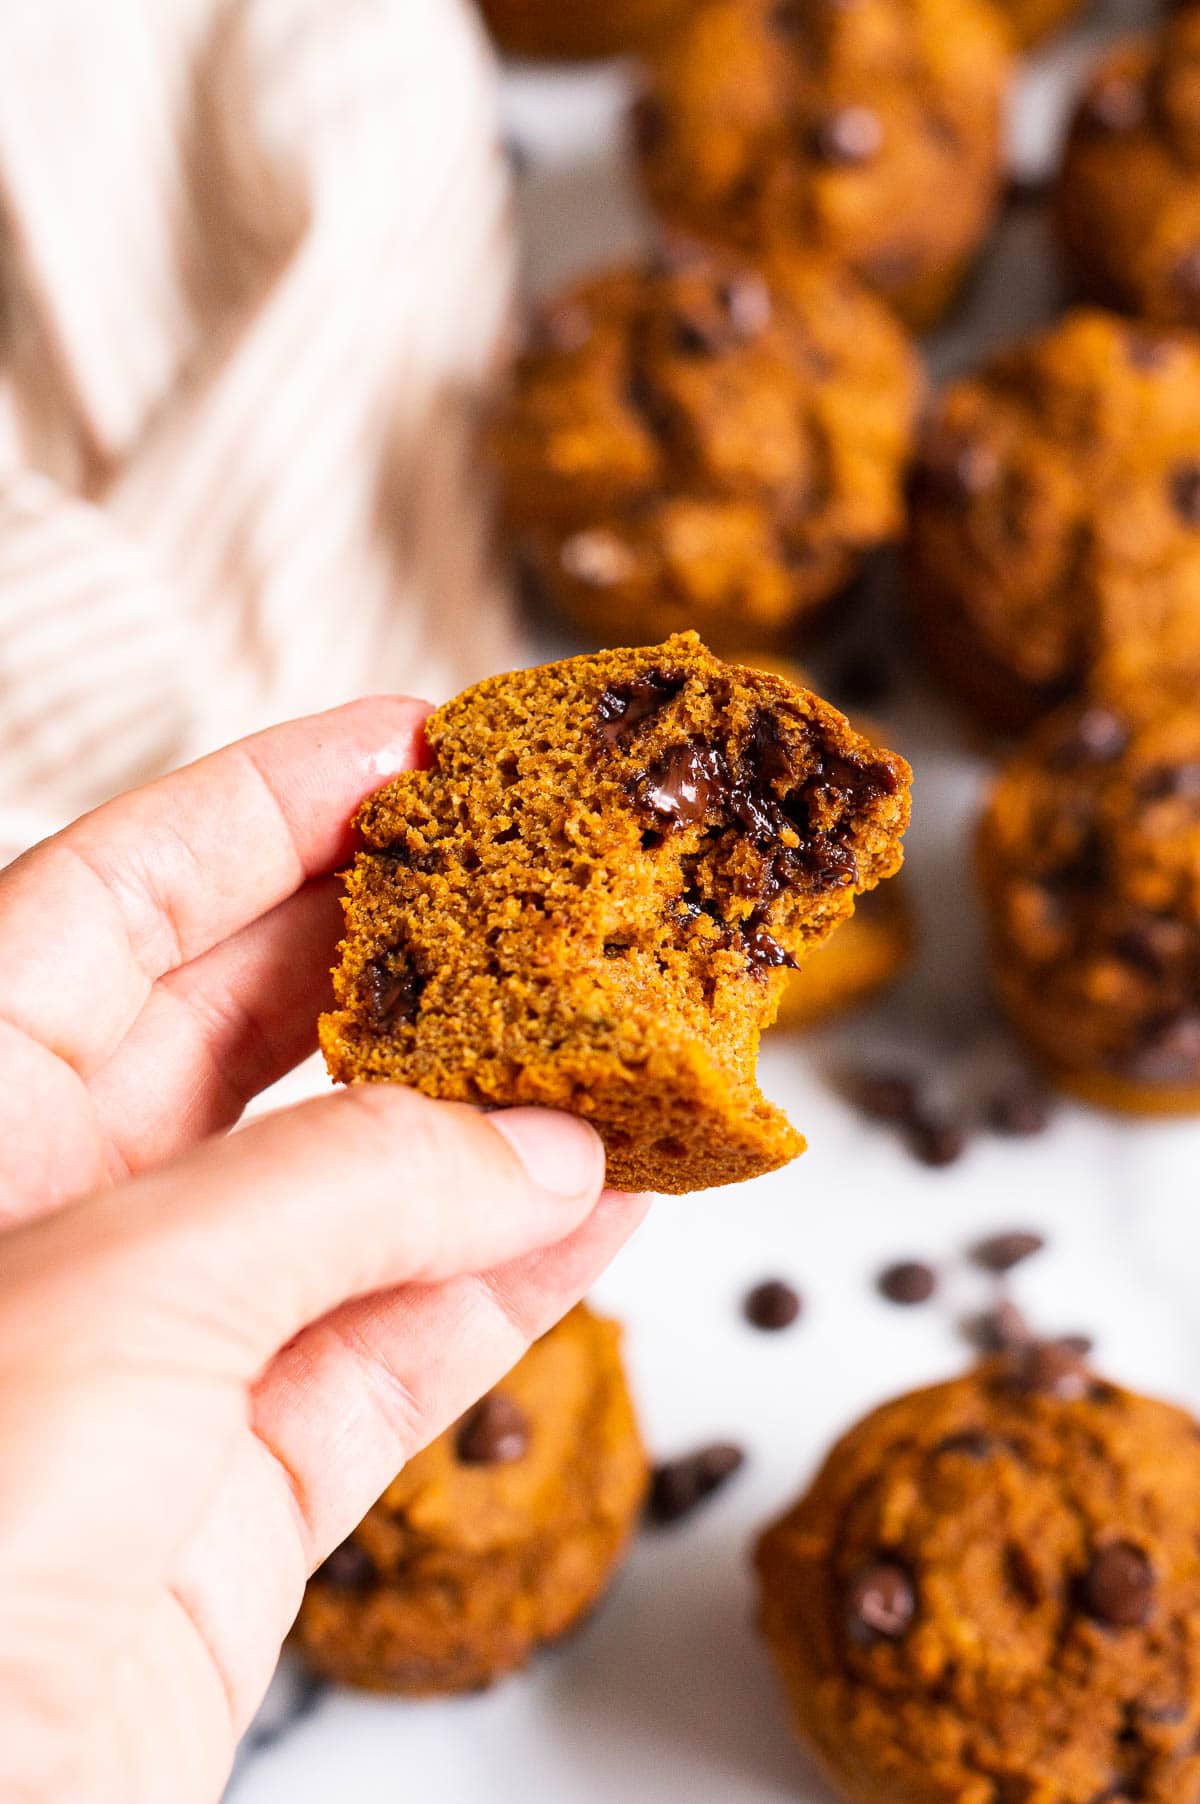 Person holding bitten pumpkin chocolate chip muffin showing texture and melted chocolate inside.